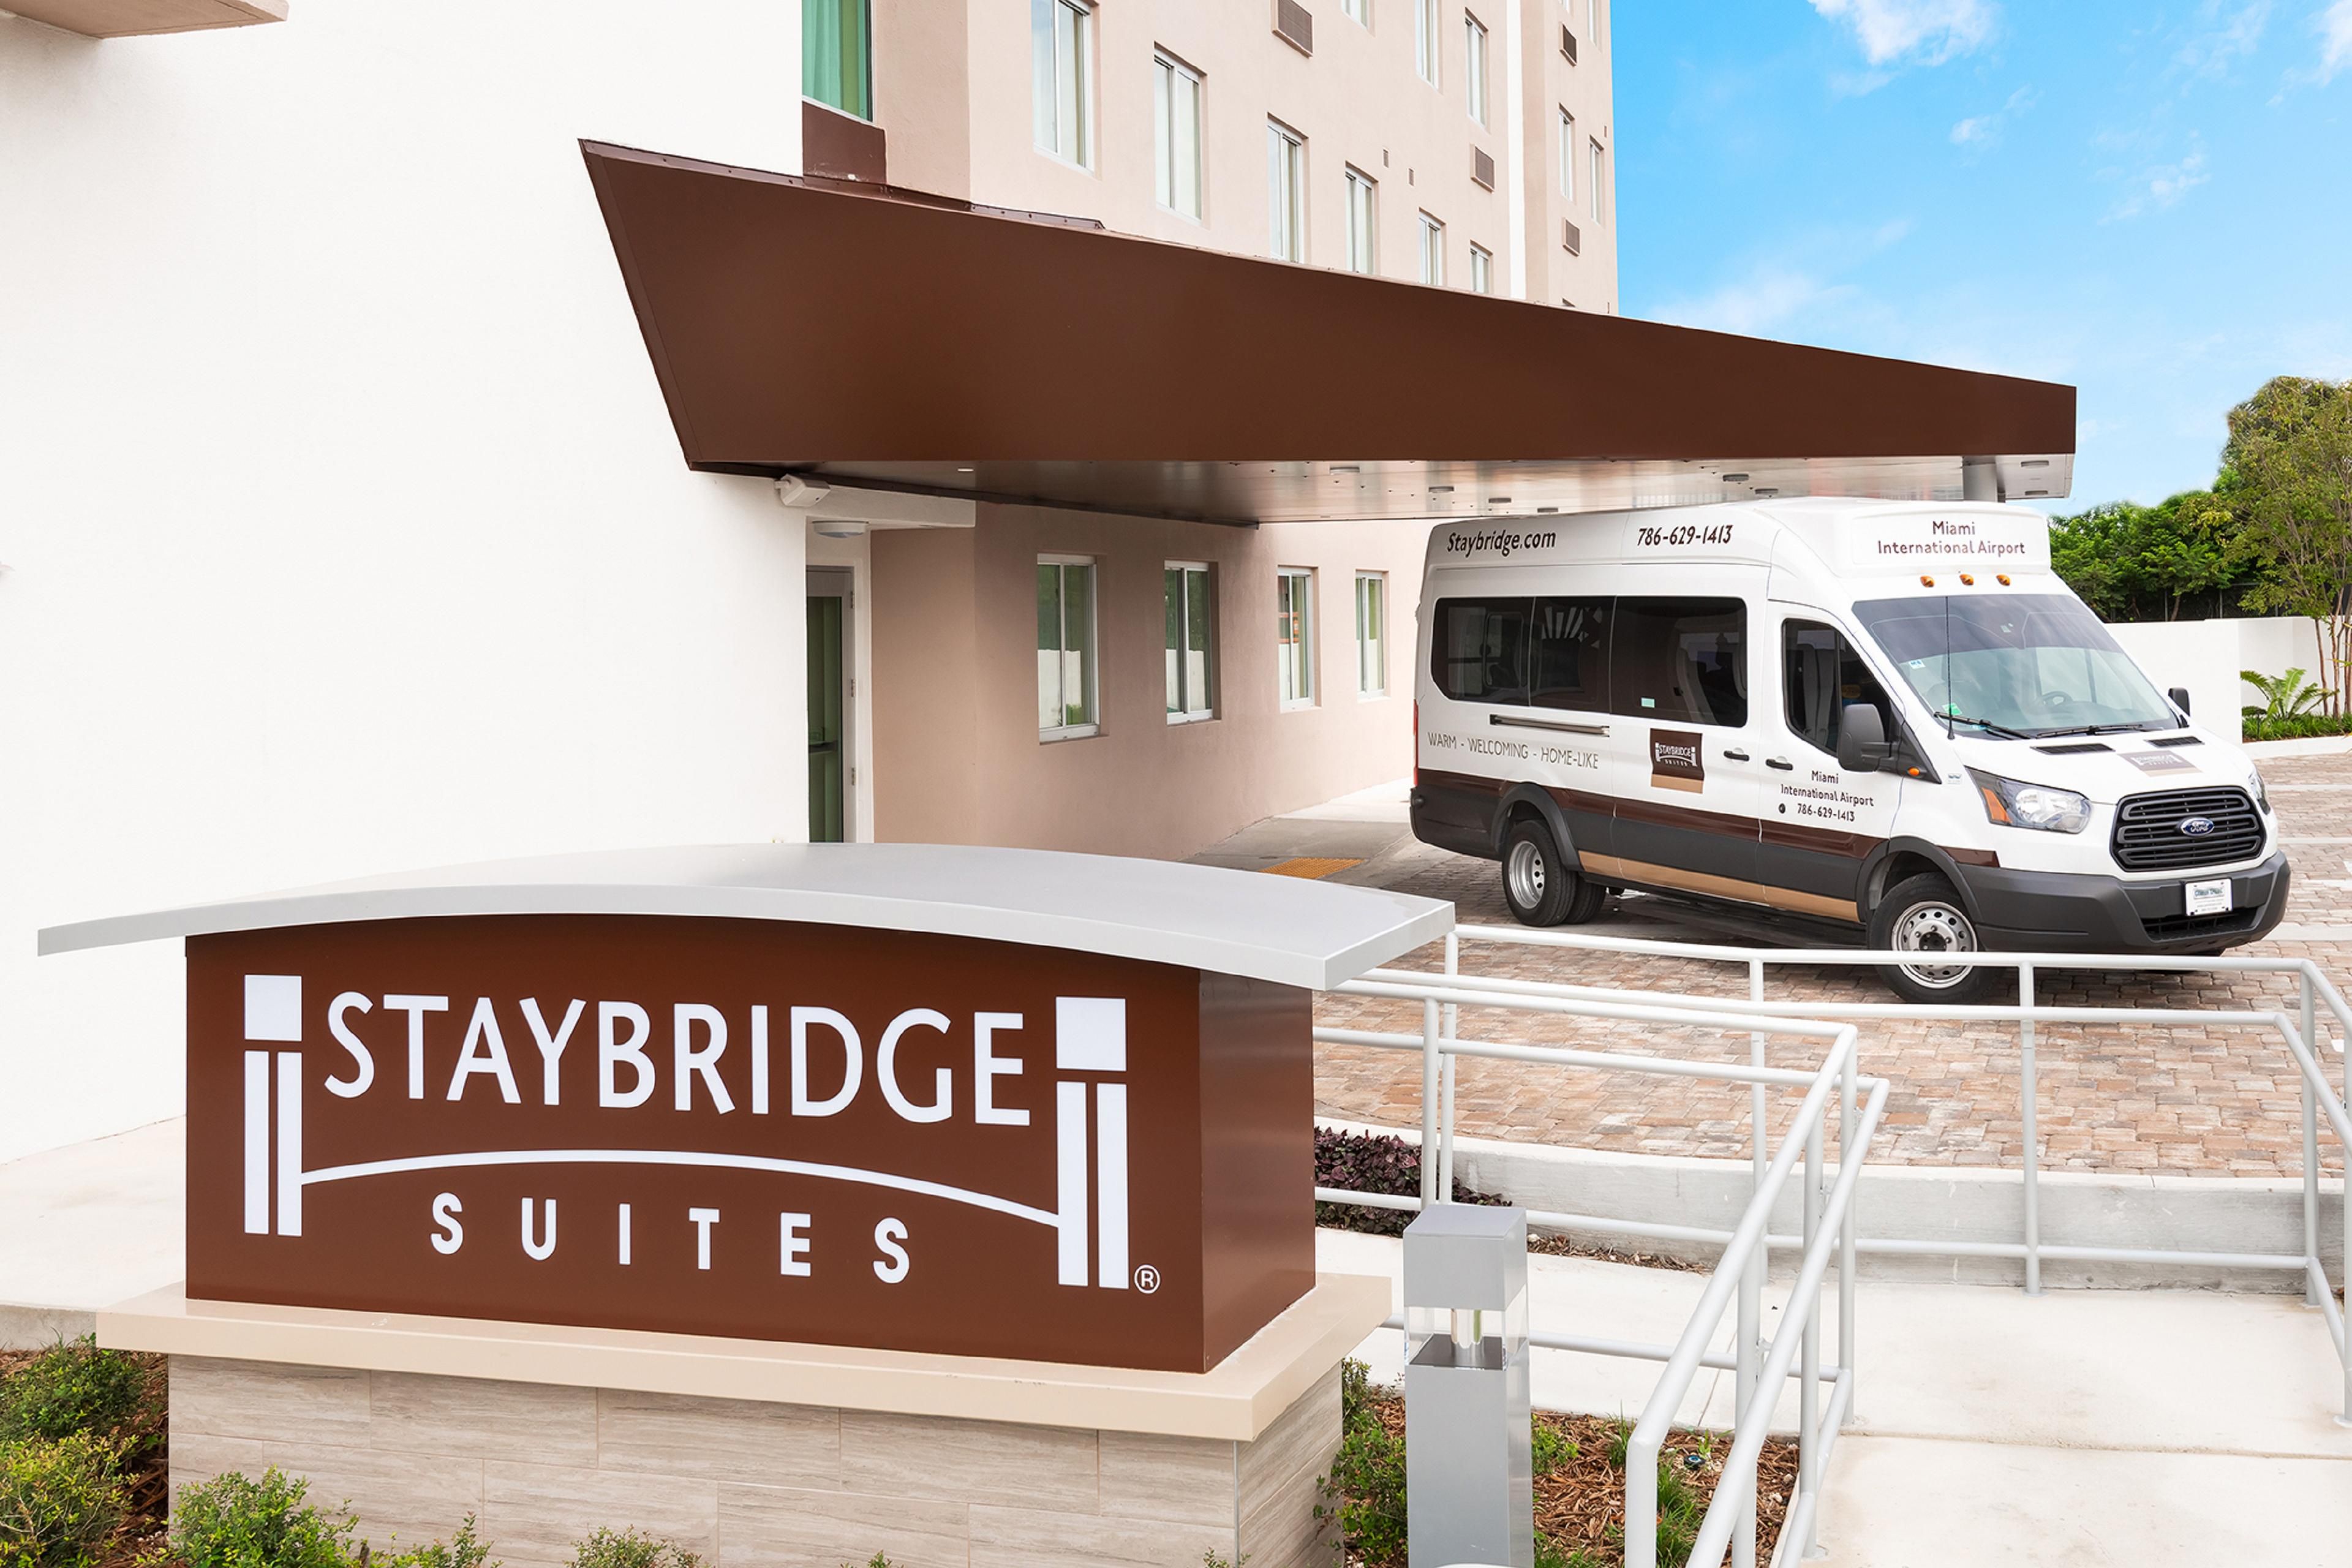 No matter the reason for your visit, enjoy the convenience of complimentary airport shuttle service offered daily from 7am to 11pm. Call hotel for shuttle pick-ups or for more info.